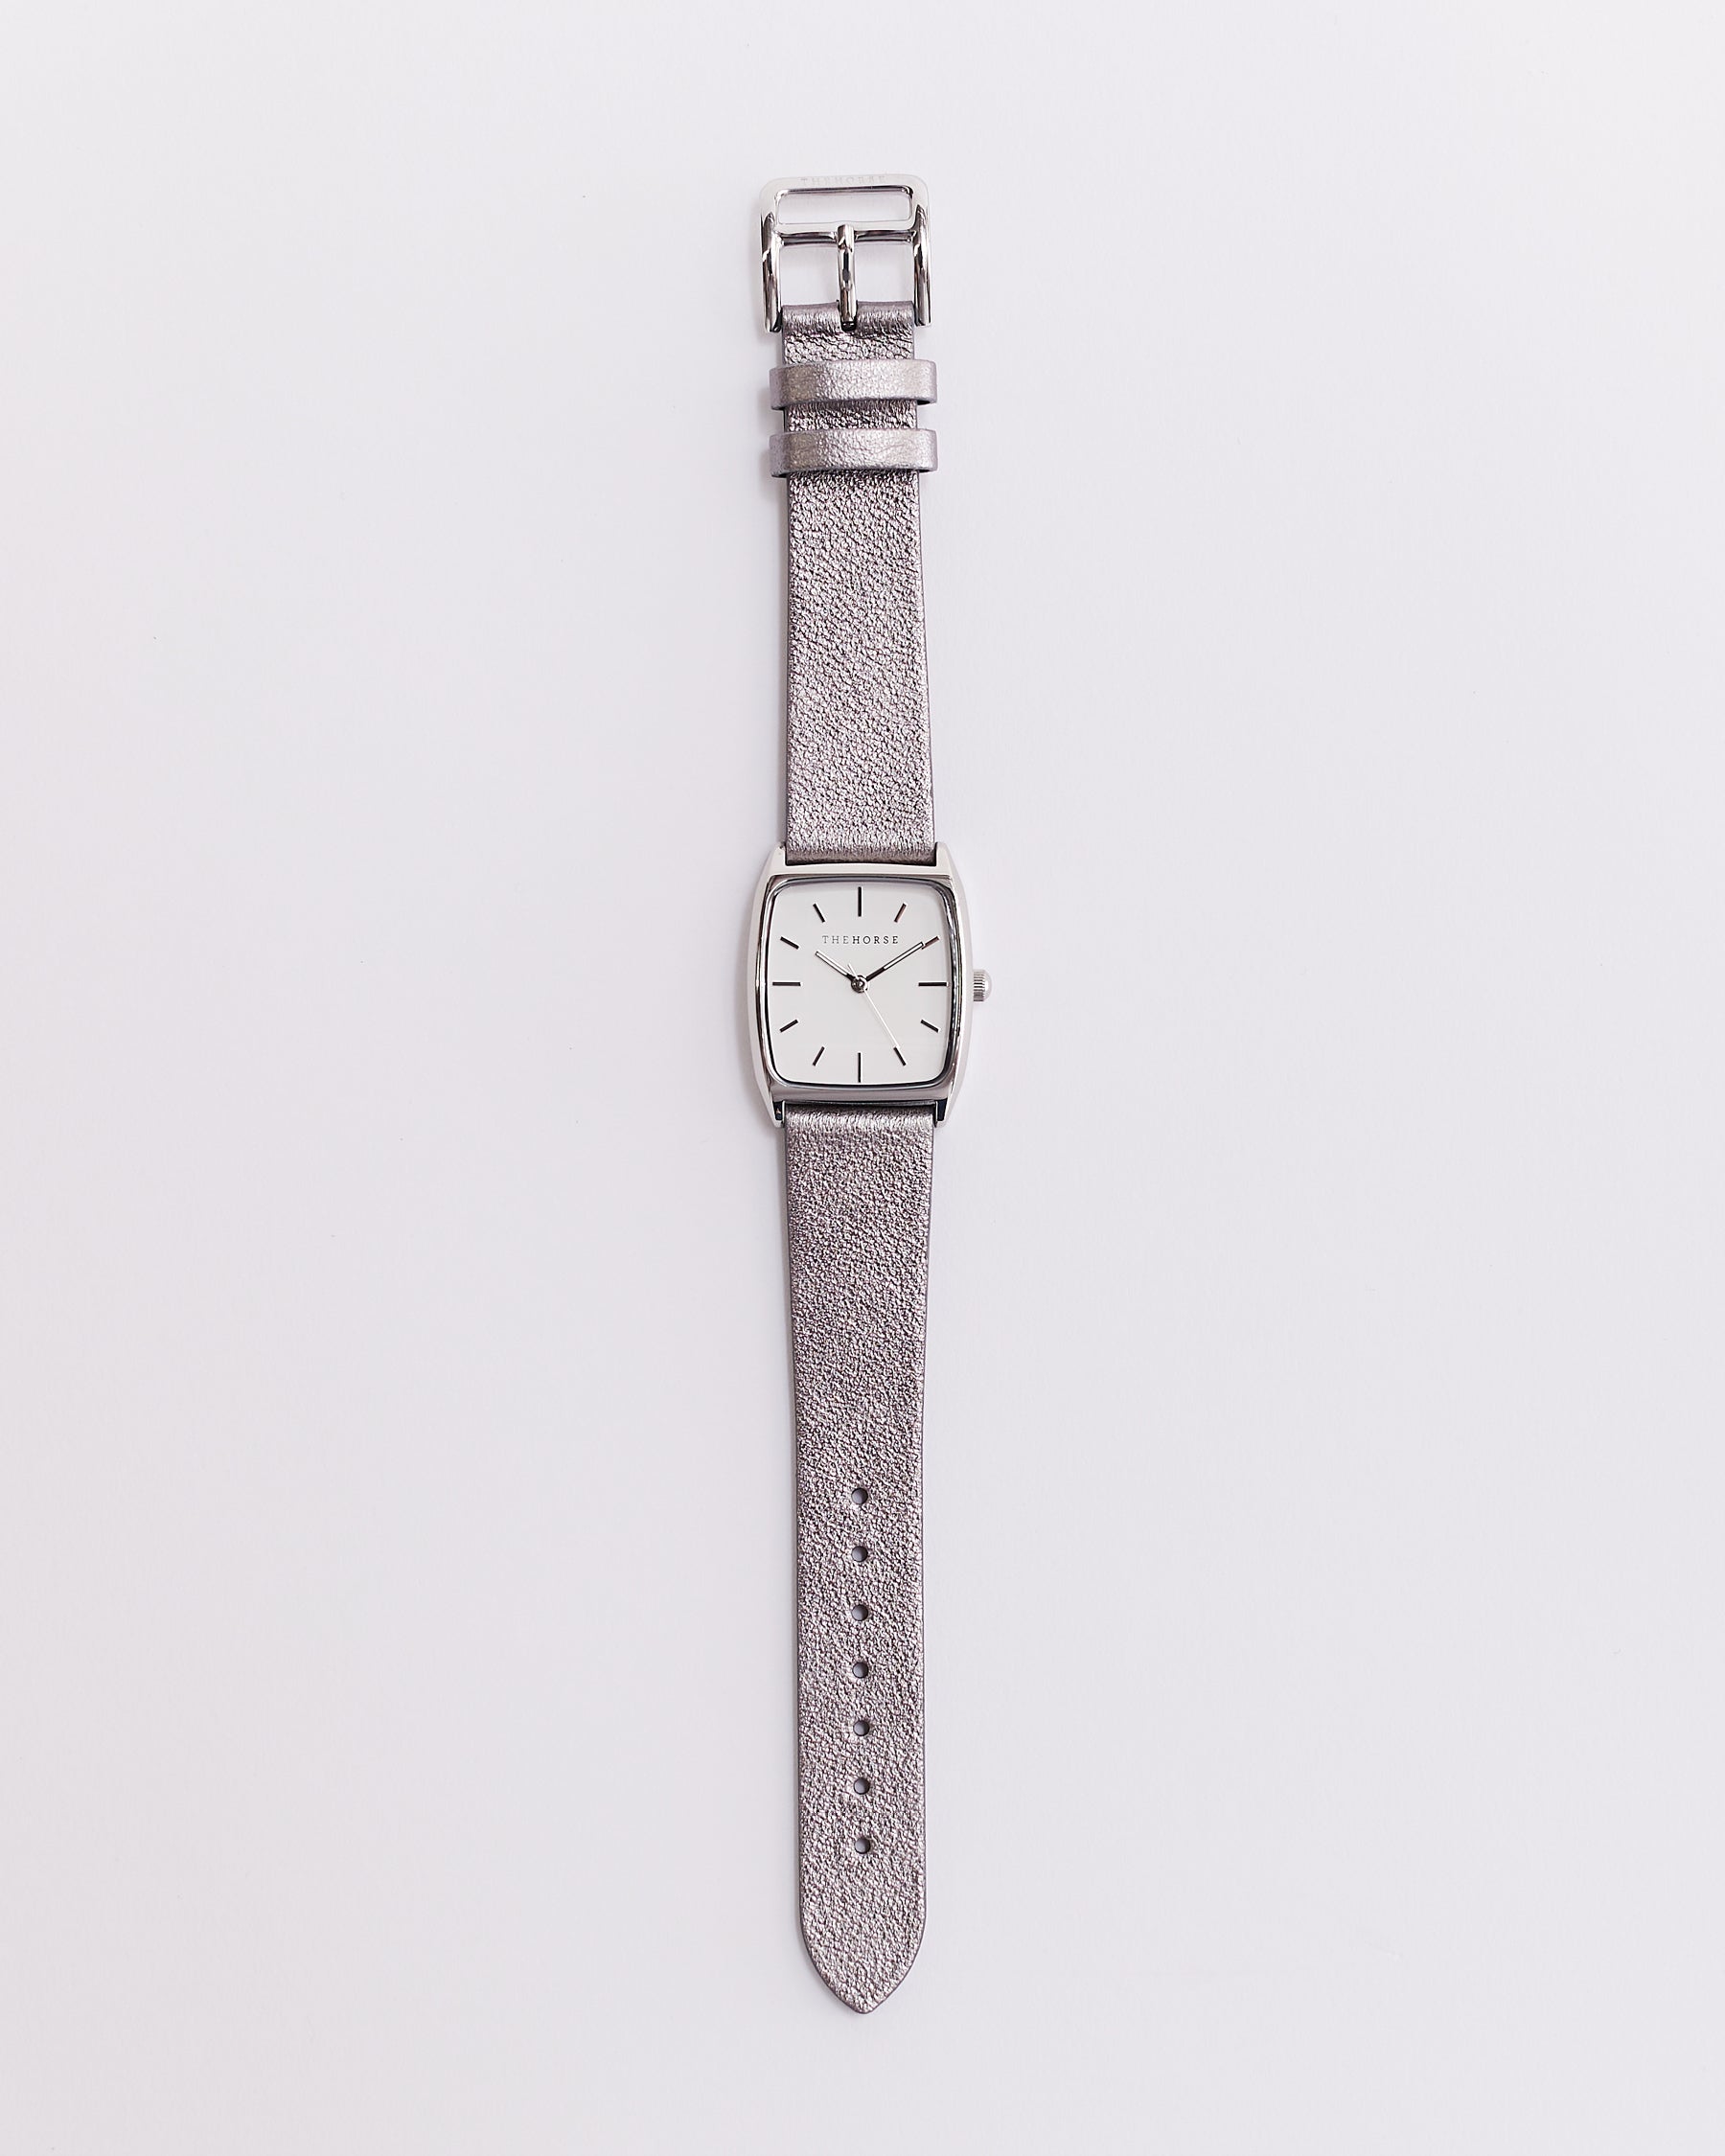 The Dress Watch: Polished Silver / White Dial / Silver Leather